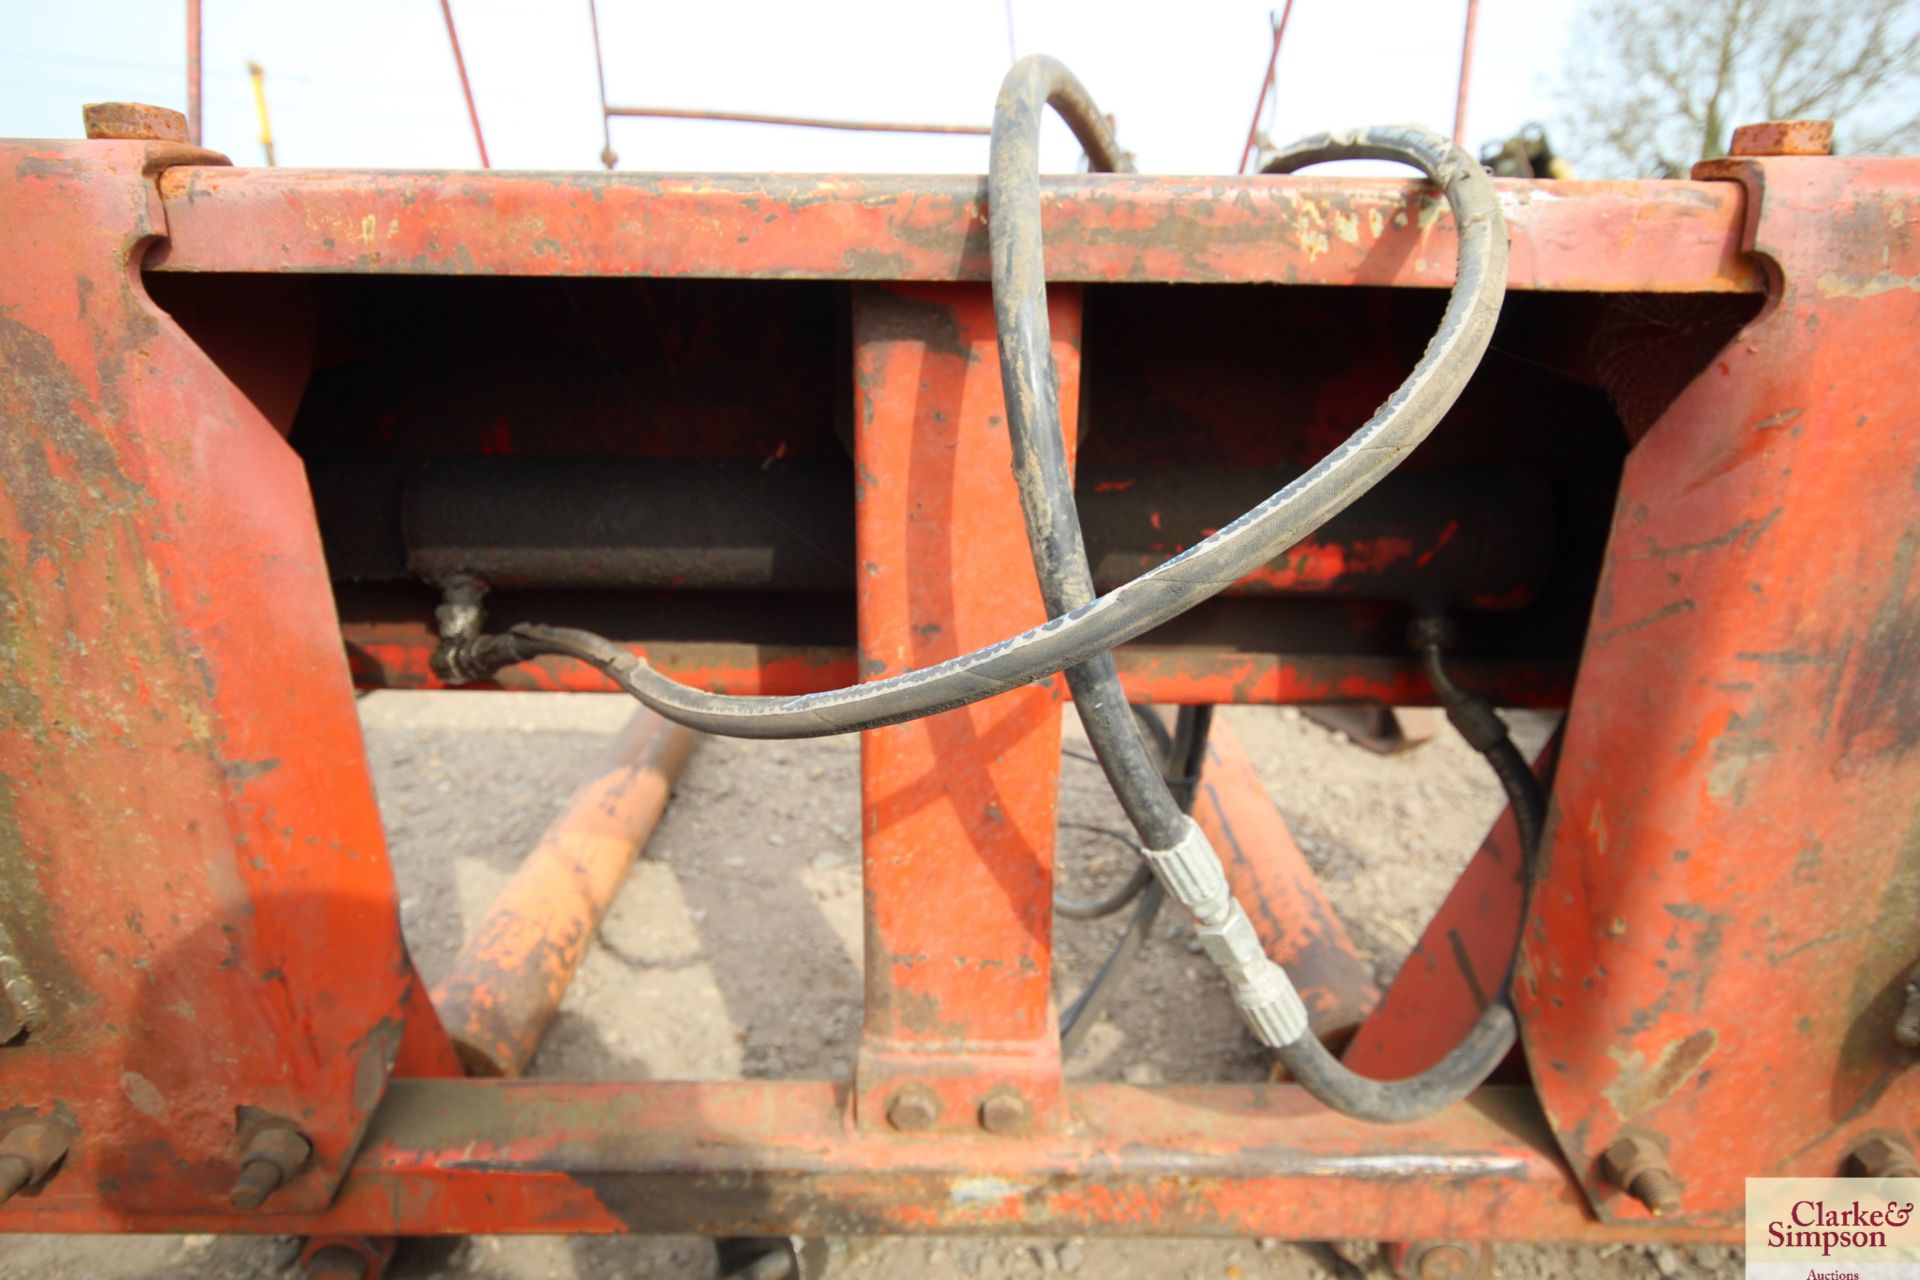 Kverneland round bale squeeze. Quicke No3 brackets. For sale due to sale of farm. V - Image 9 of 10